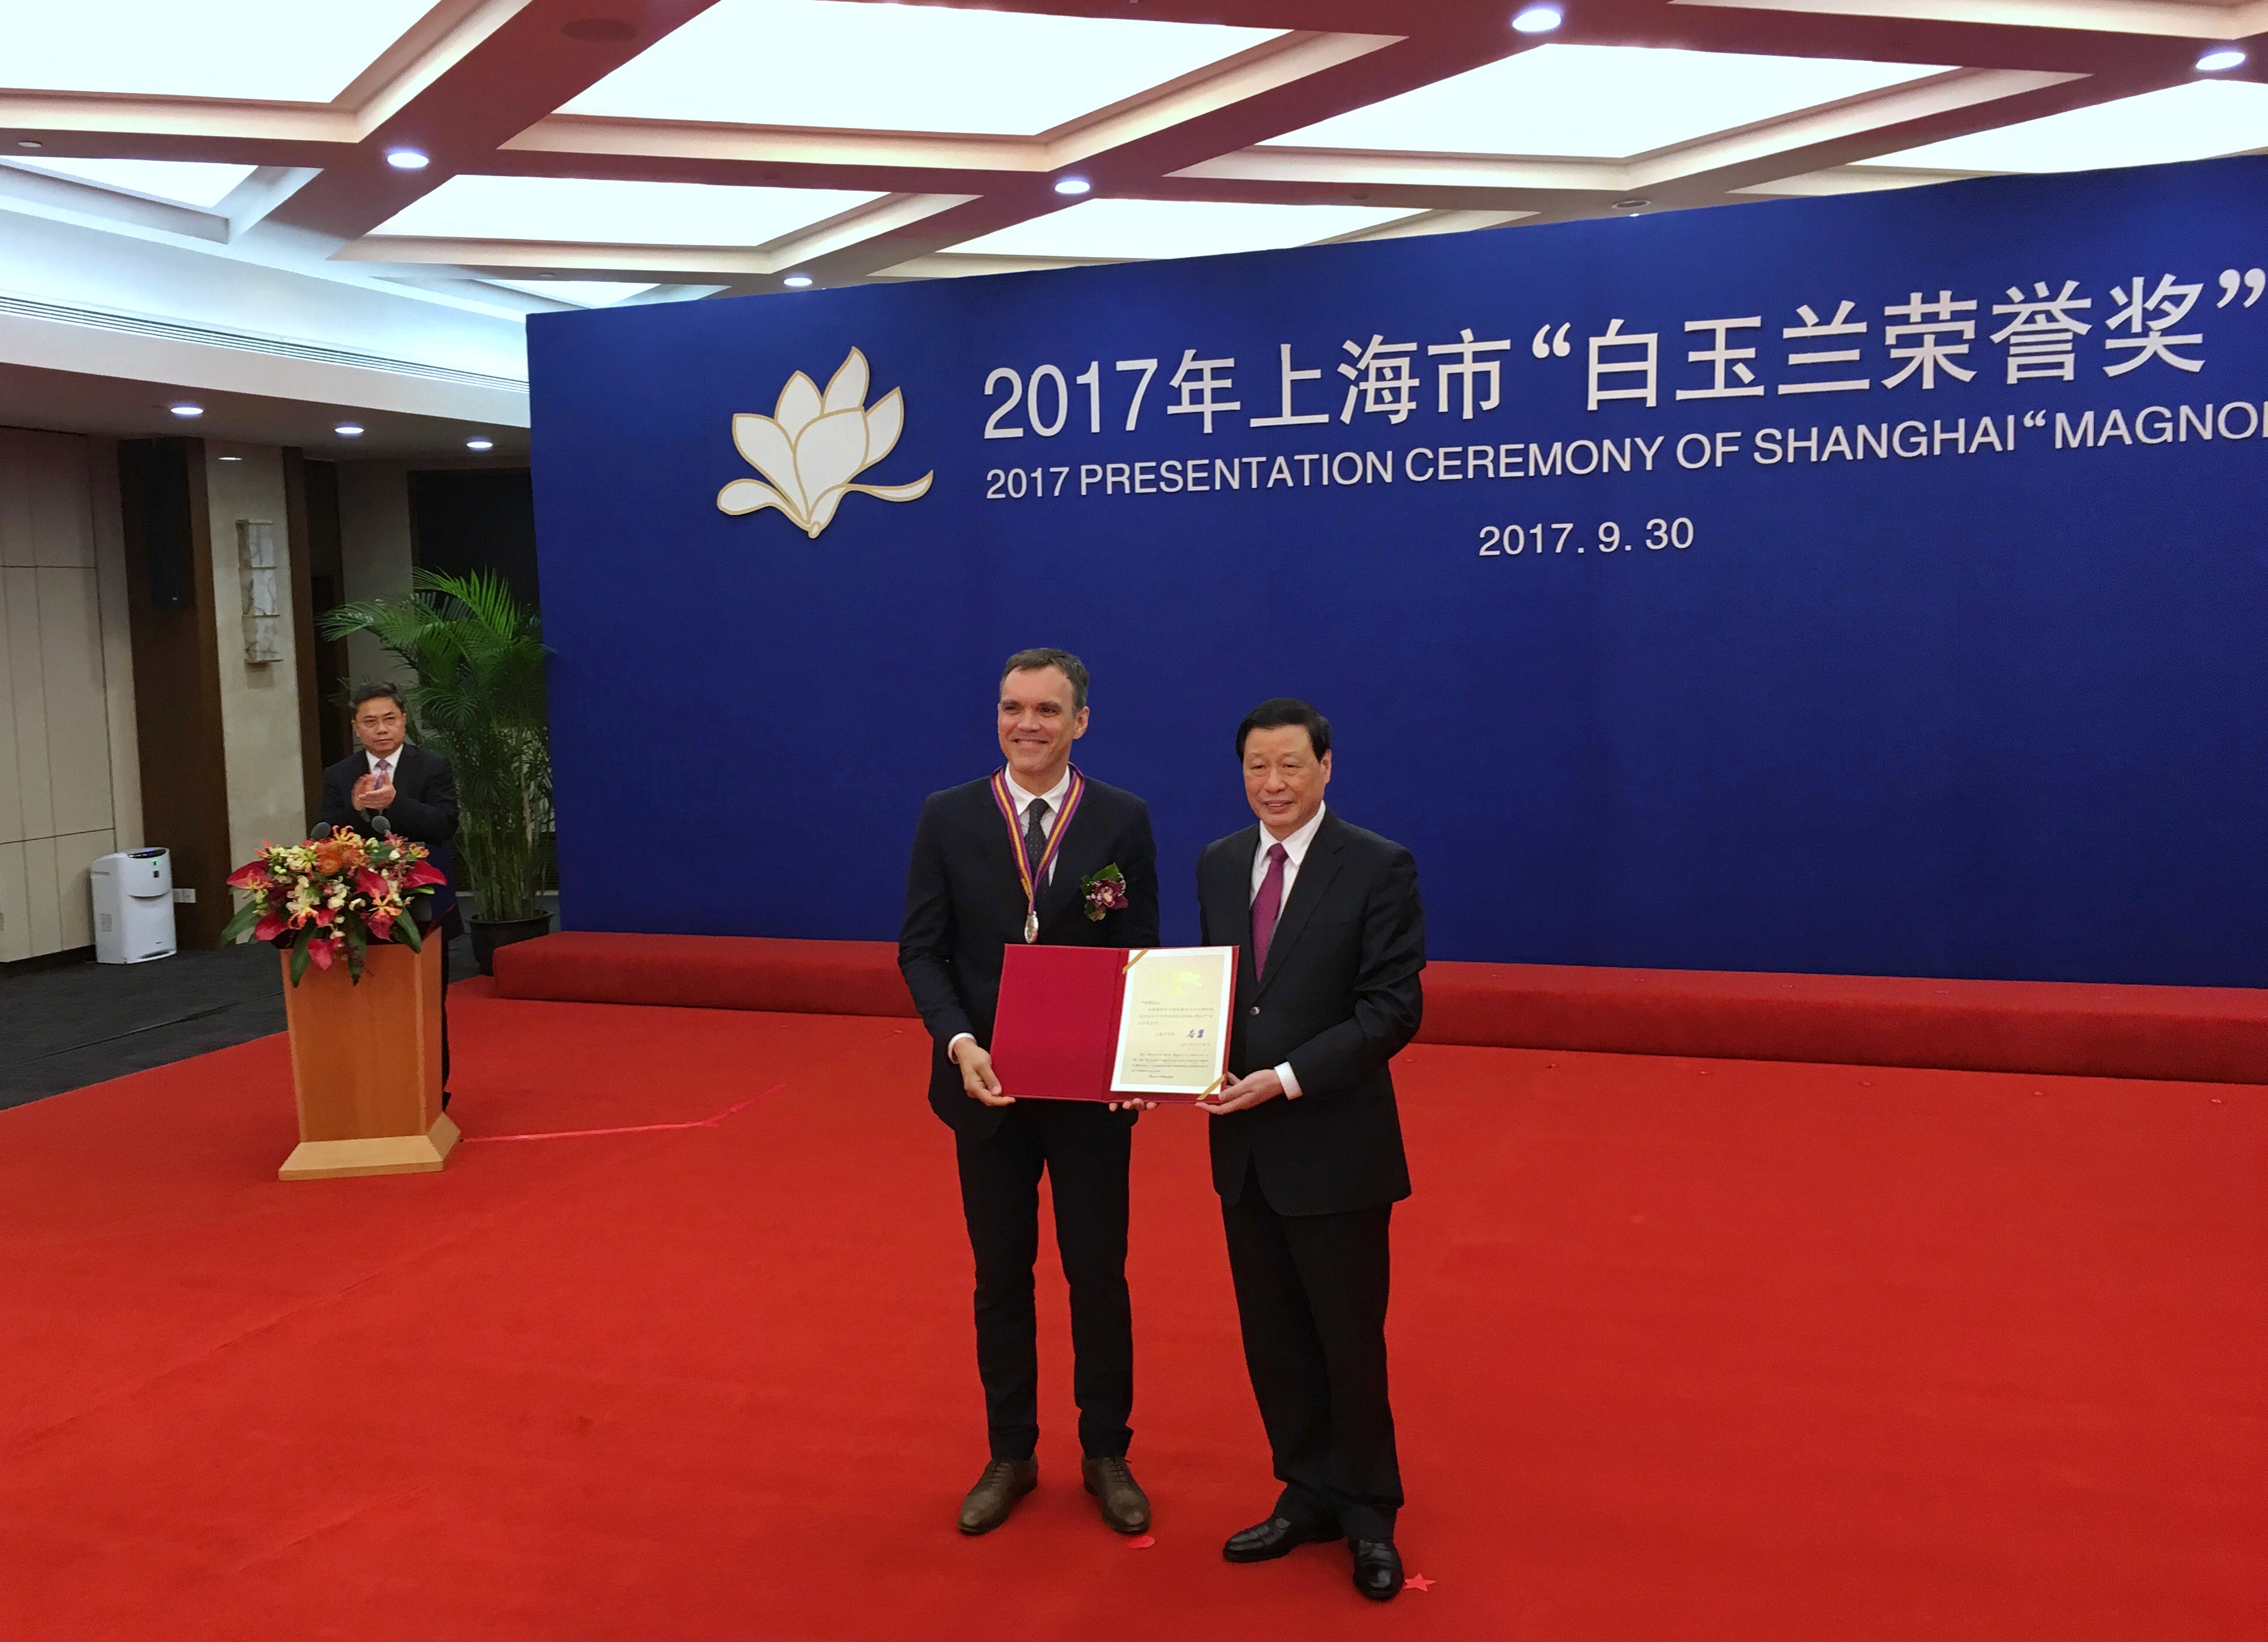 Mr.Ying Yong, Mayor of Shanghai, presented the award to Jan Kreibaum. (Photo: Clariant)